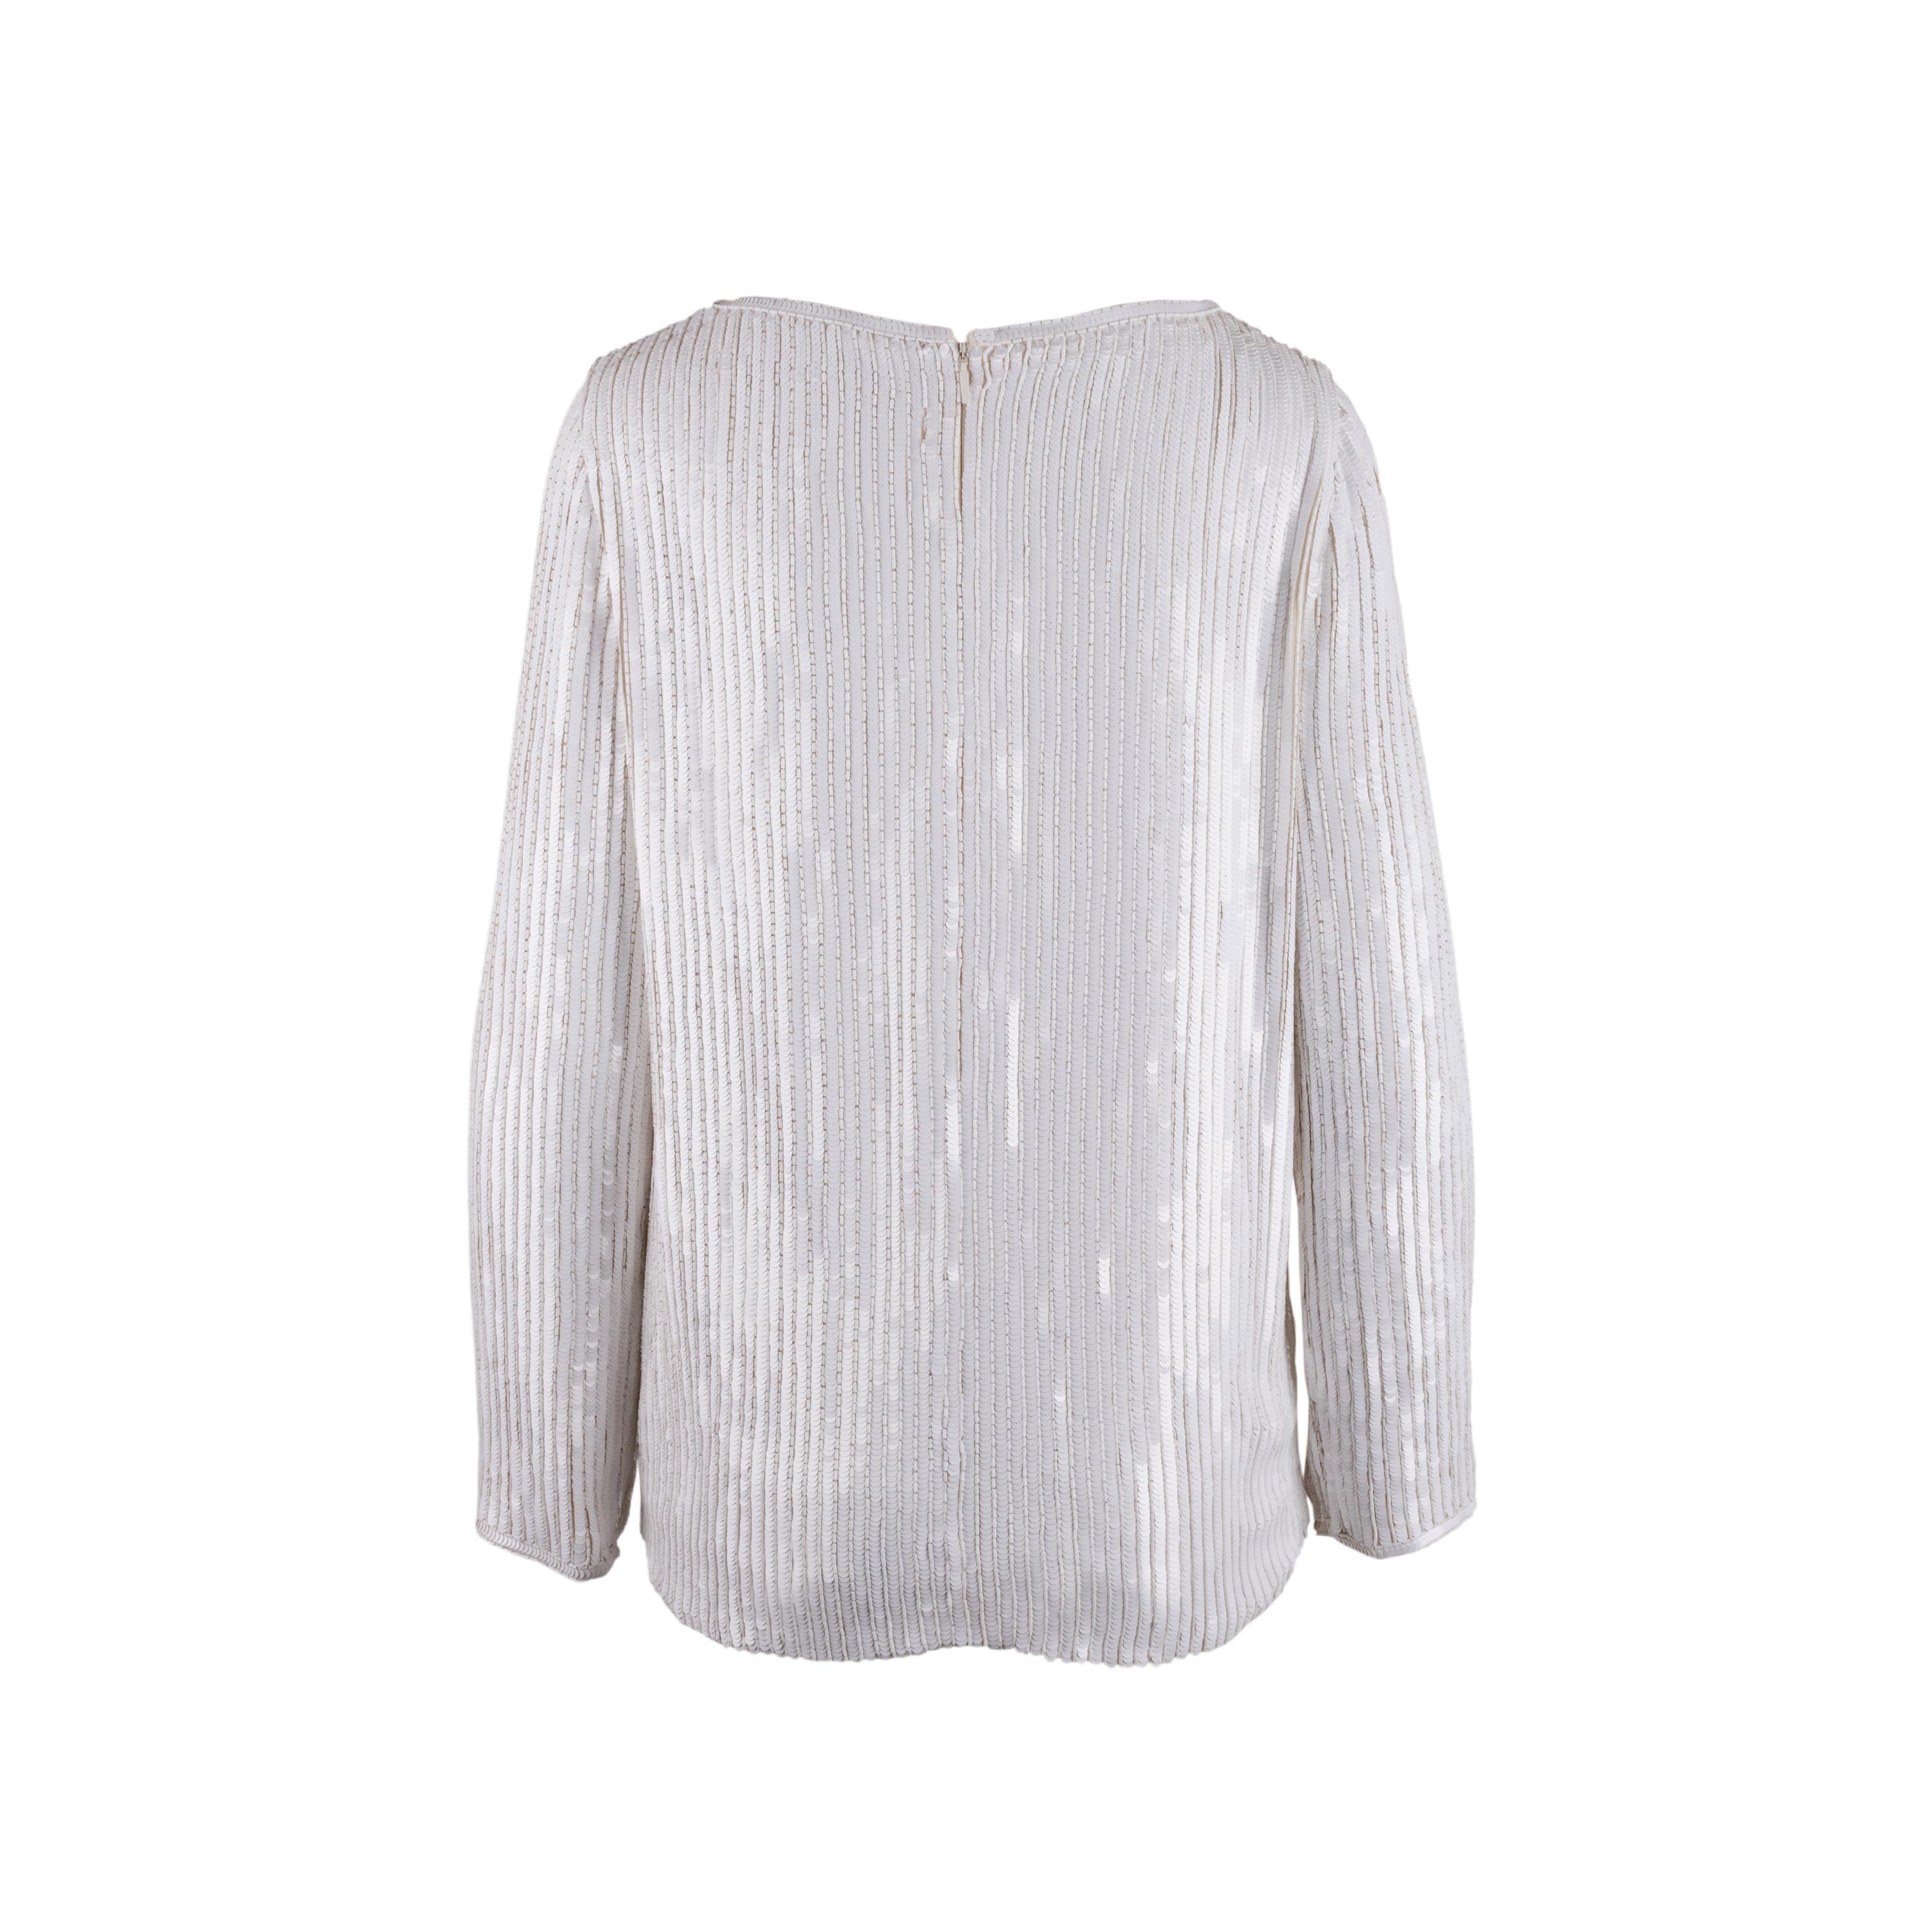 Saint Laurent white silk blouse, long sleeves, crew neck, back zip, decorated with white sequins for full coverage.